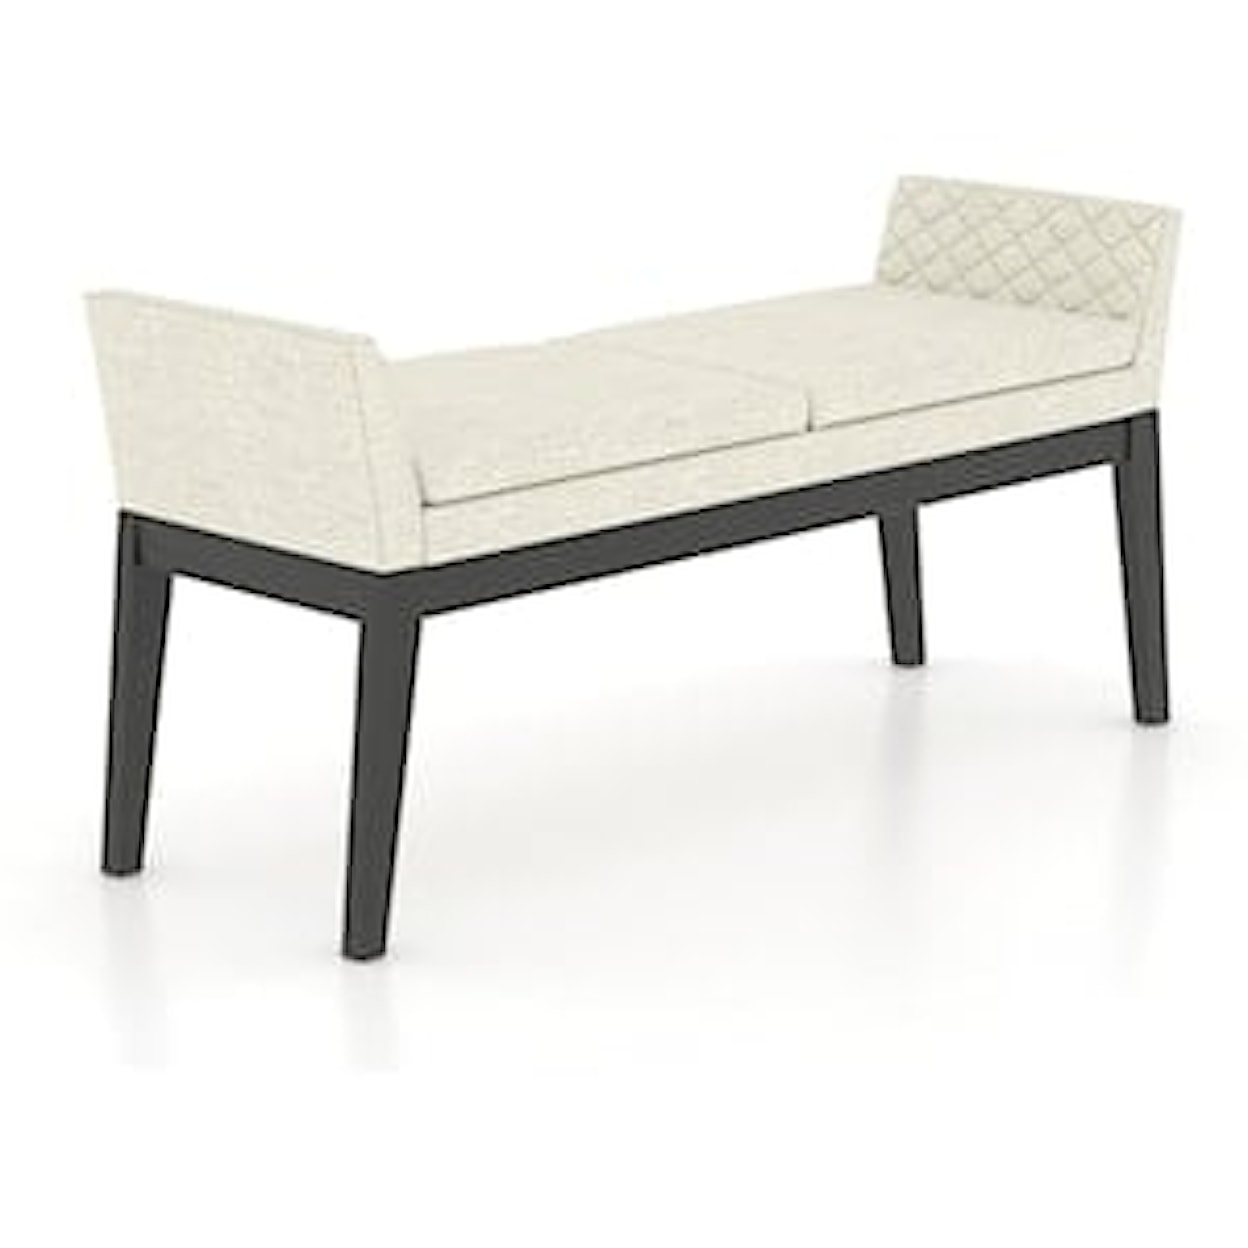 Canadel Downtown Upholstered bench